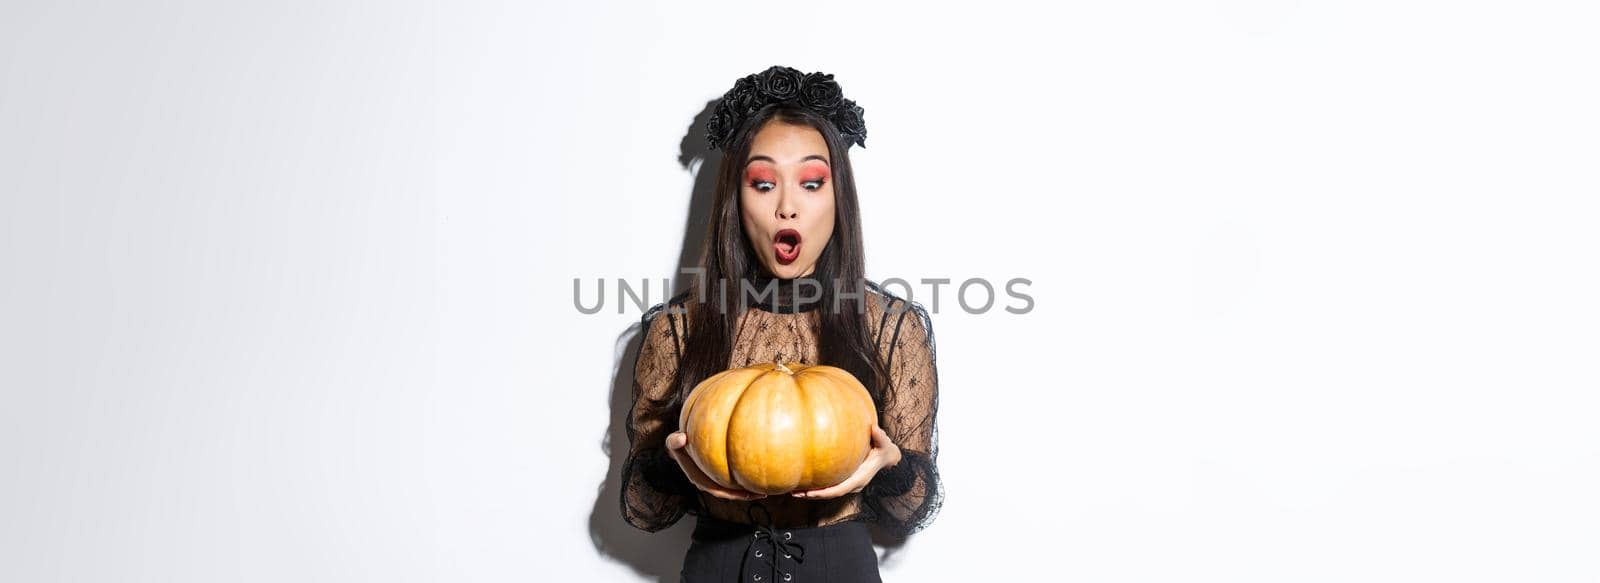 Image of amazed asian girl looking at big pumpkin fascinated, wearing gothic dress and black wreath, standing over white background.